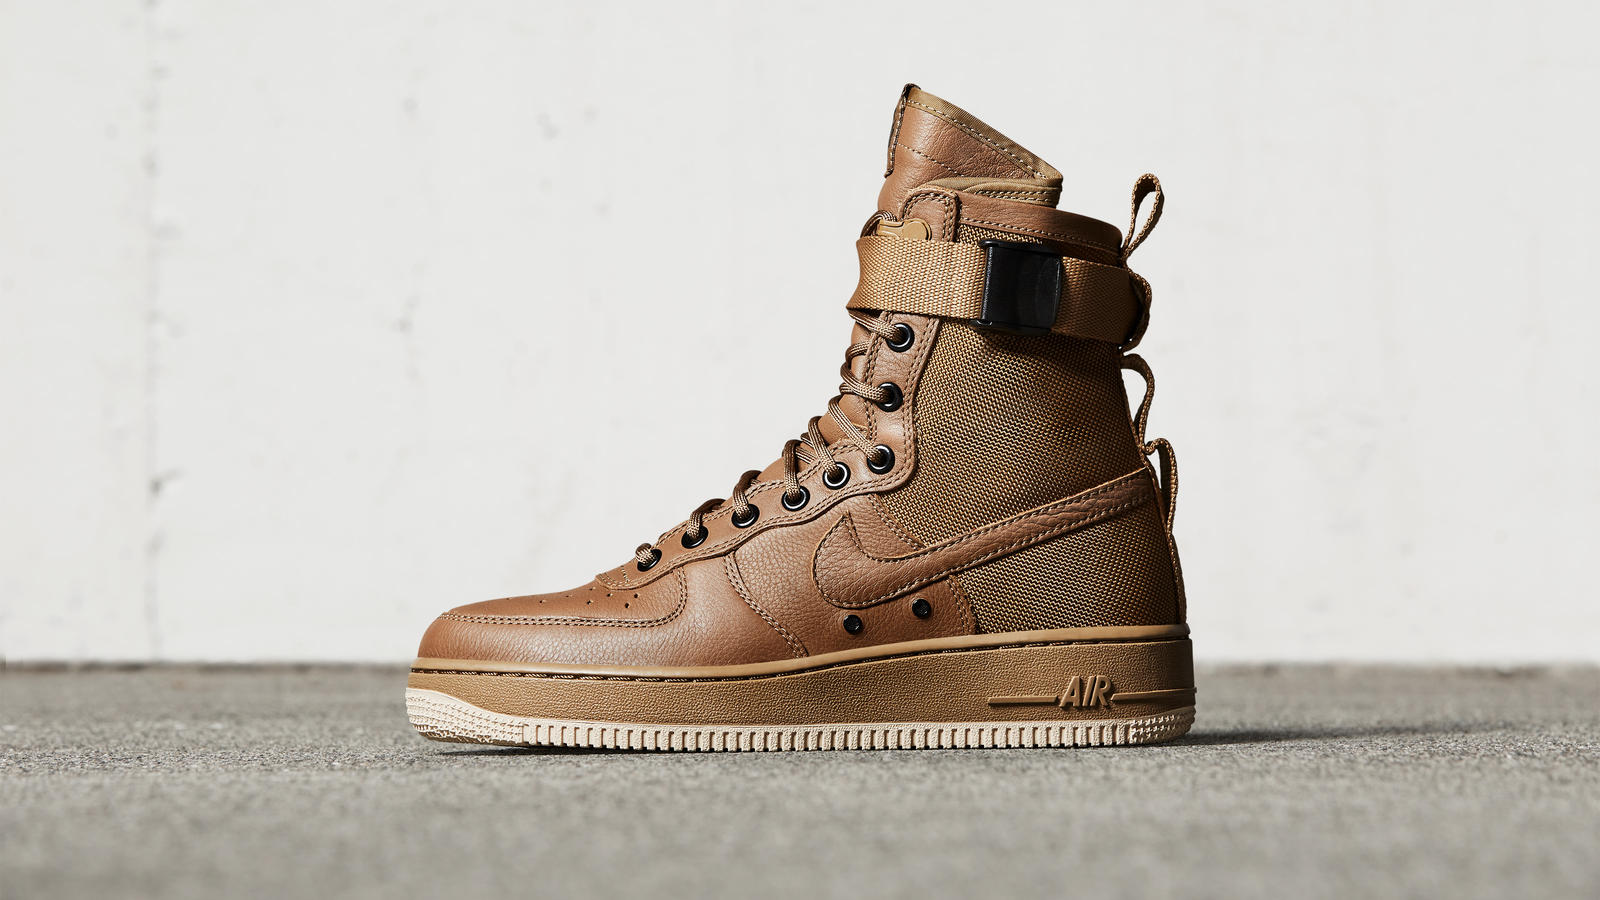 The New Generation of Force - The Special Field Air Force 1 - WearTesters